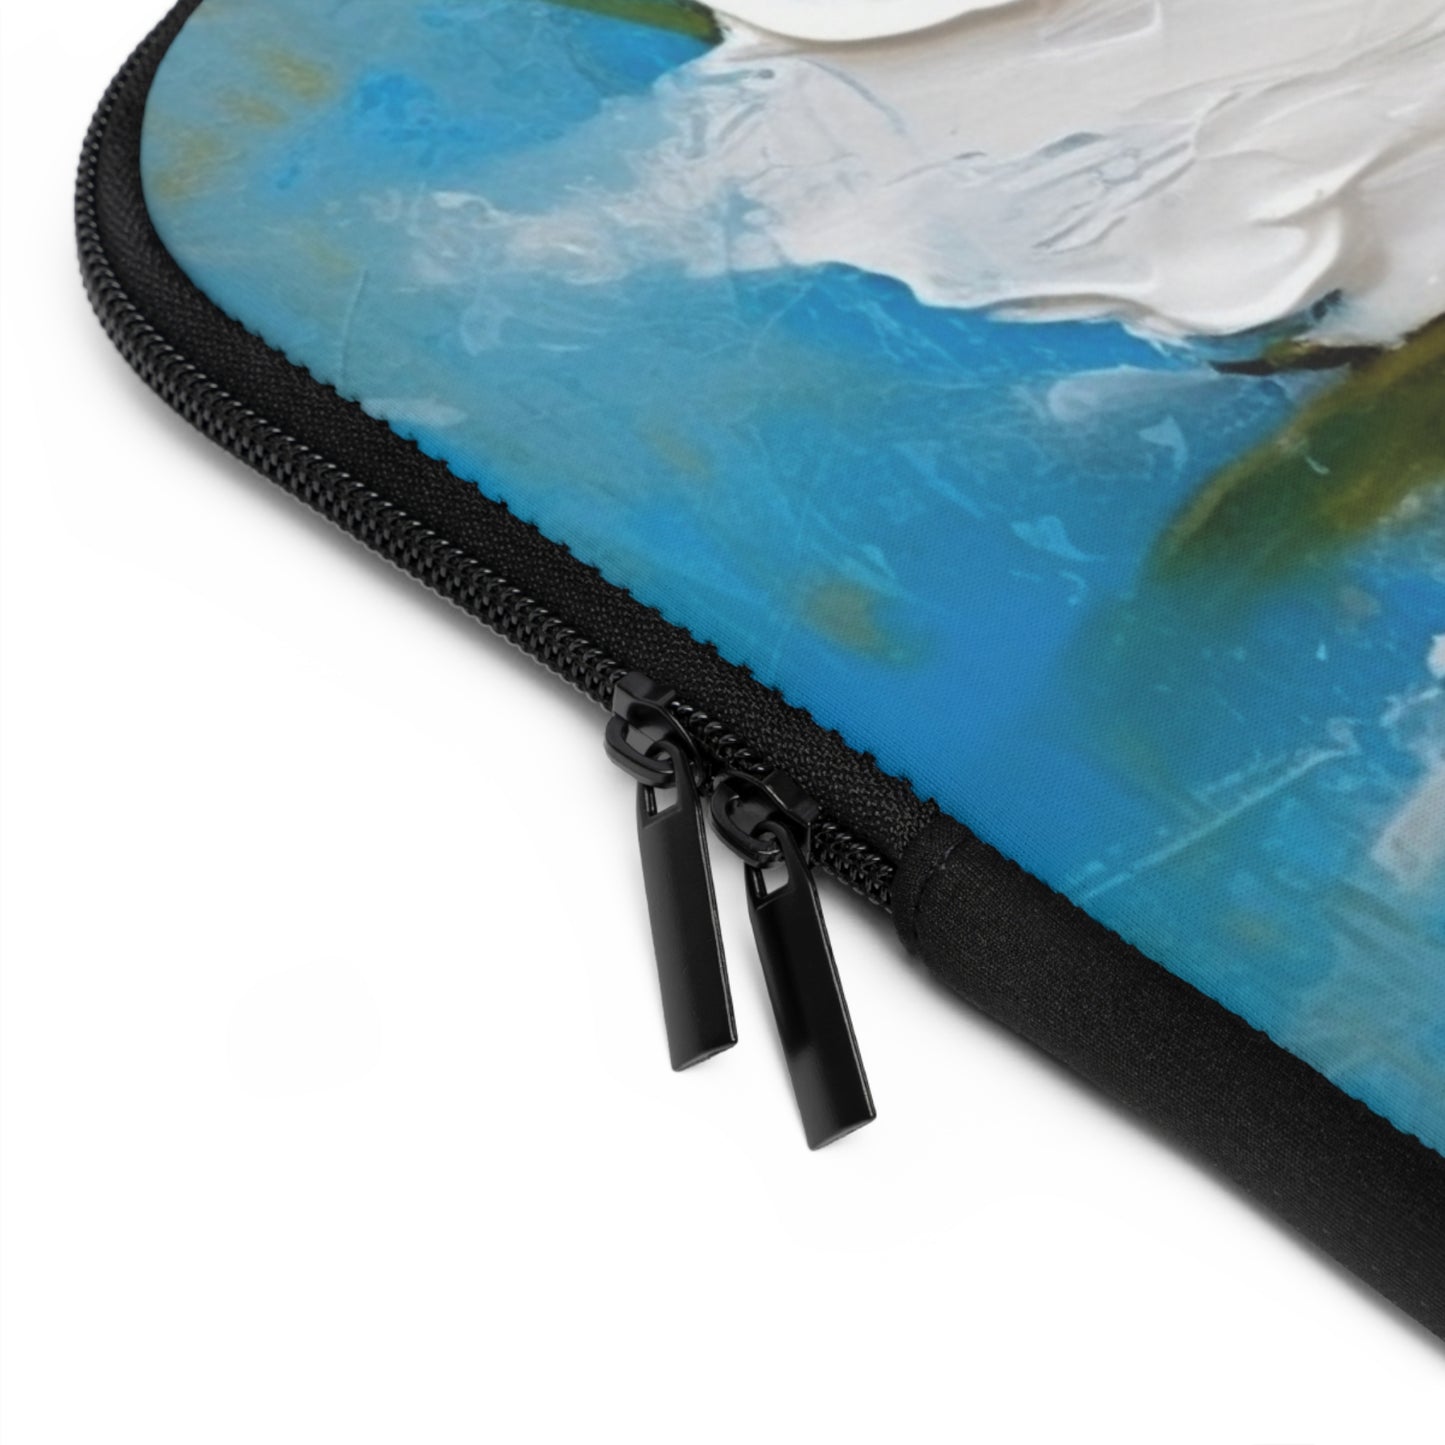 Ethereal Elegance: Laptop Sleeve featuring an Abstract Oil Painting of Jasmine